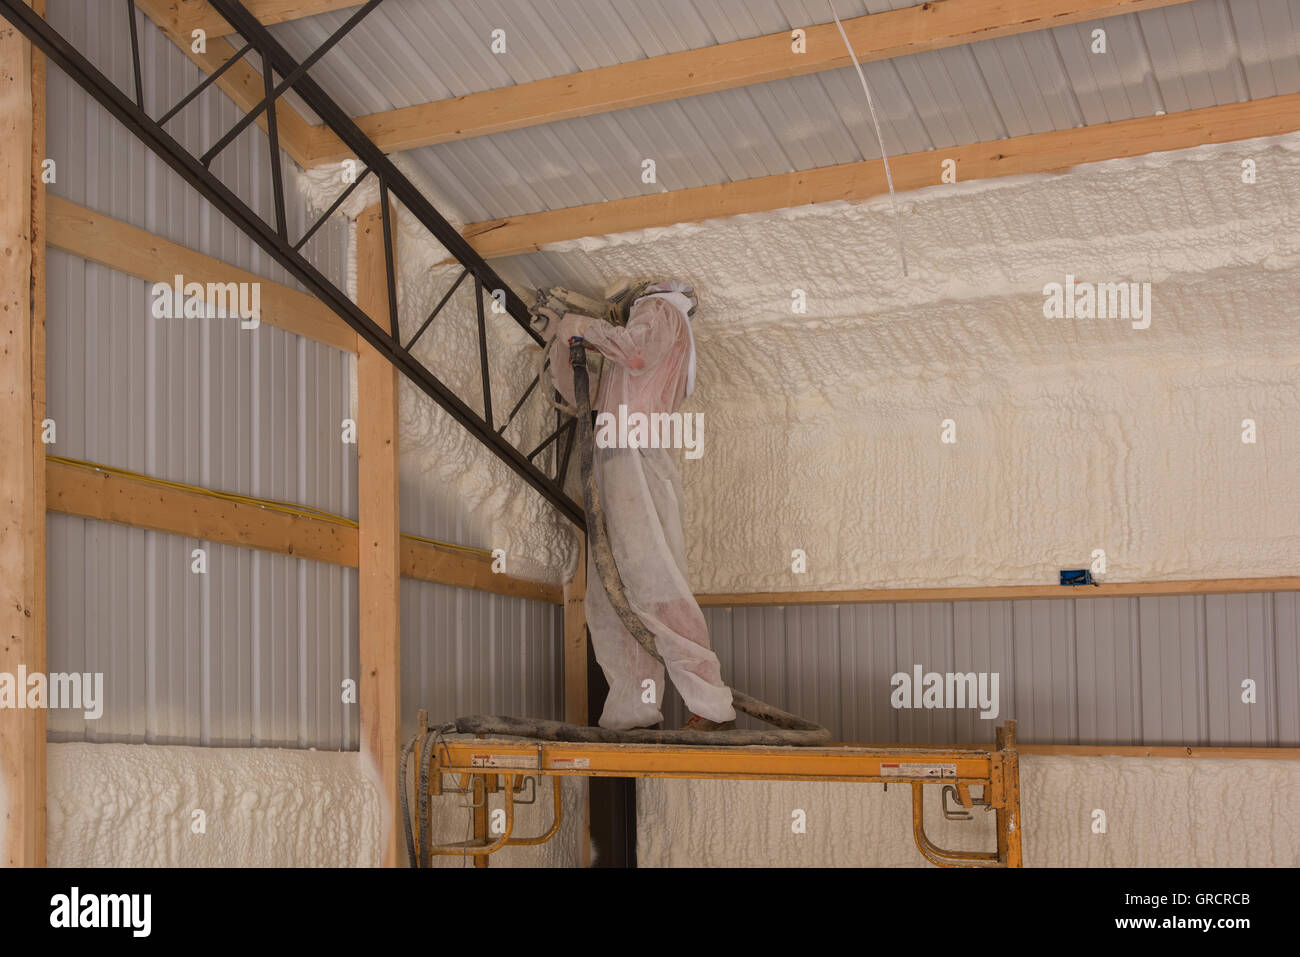 A technician applies open cell foam insulation to a structure's interior for sound control and energy conservation. Stock Photo